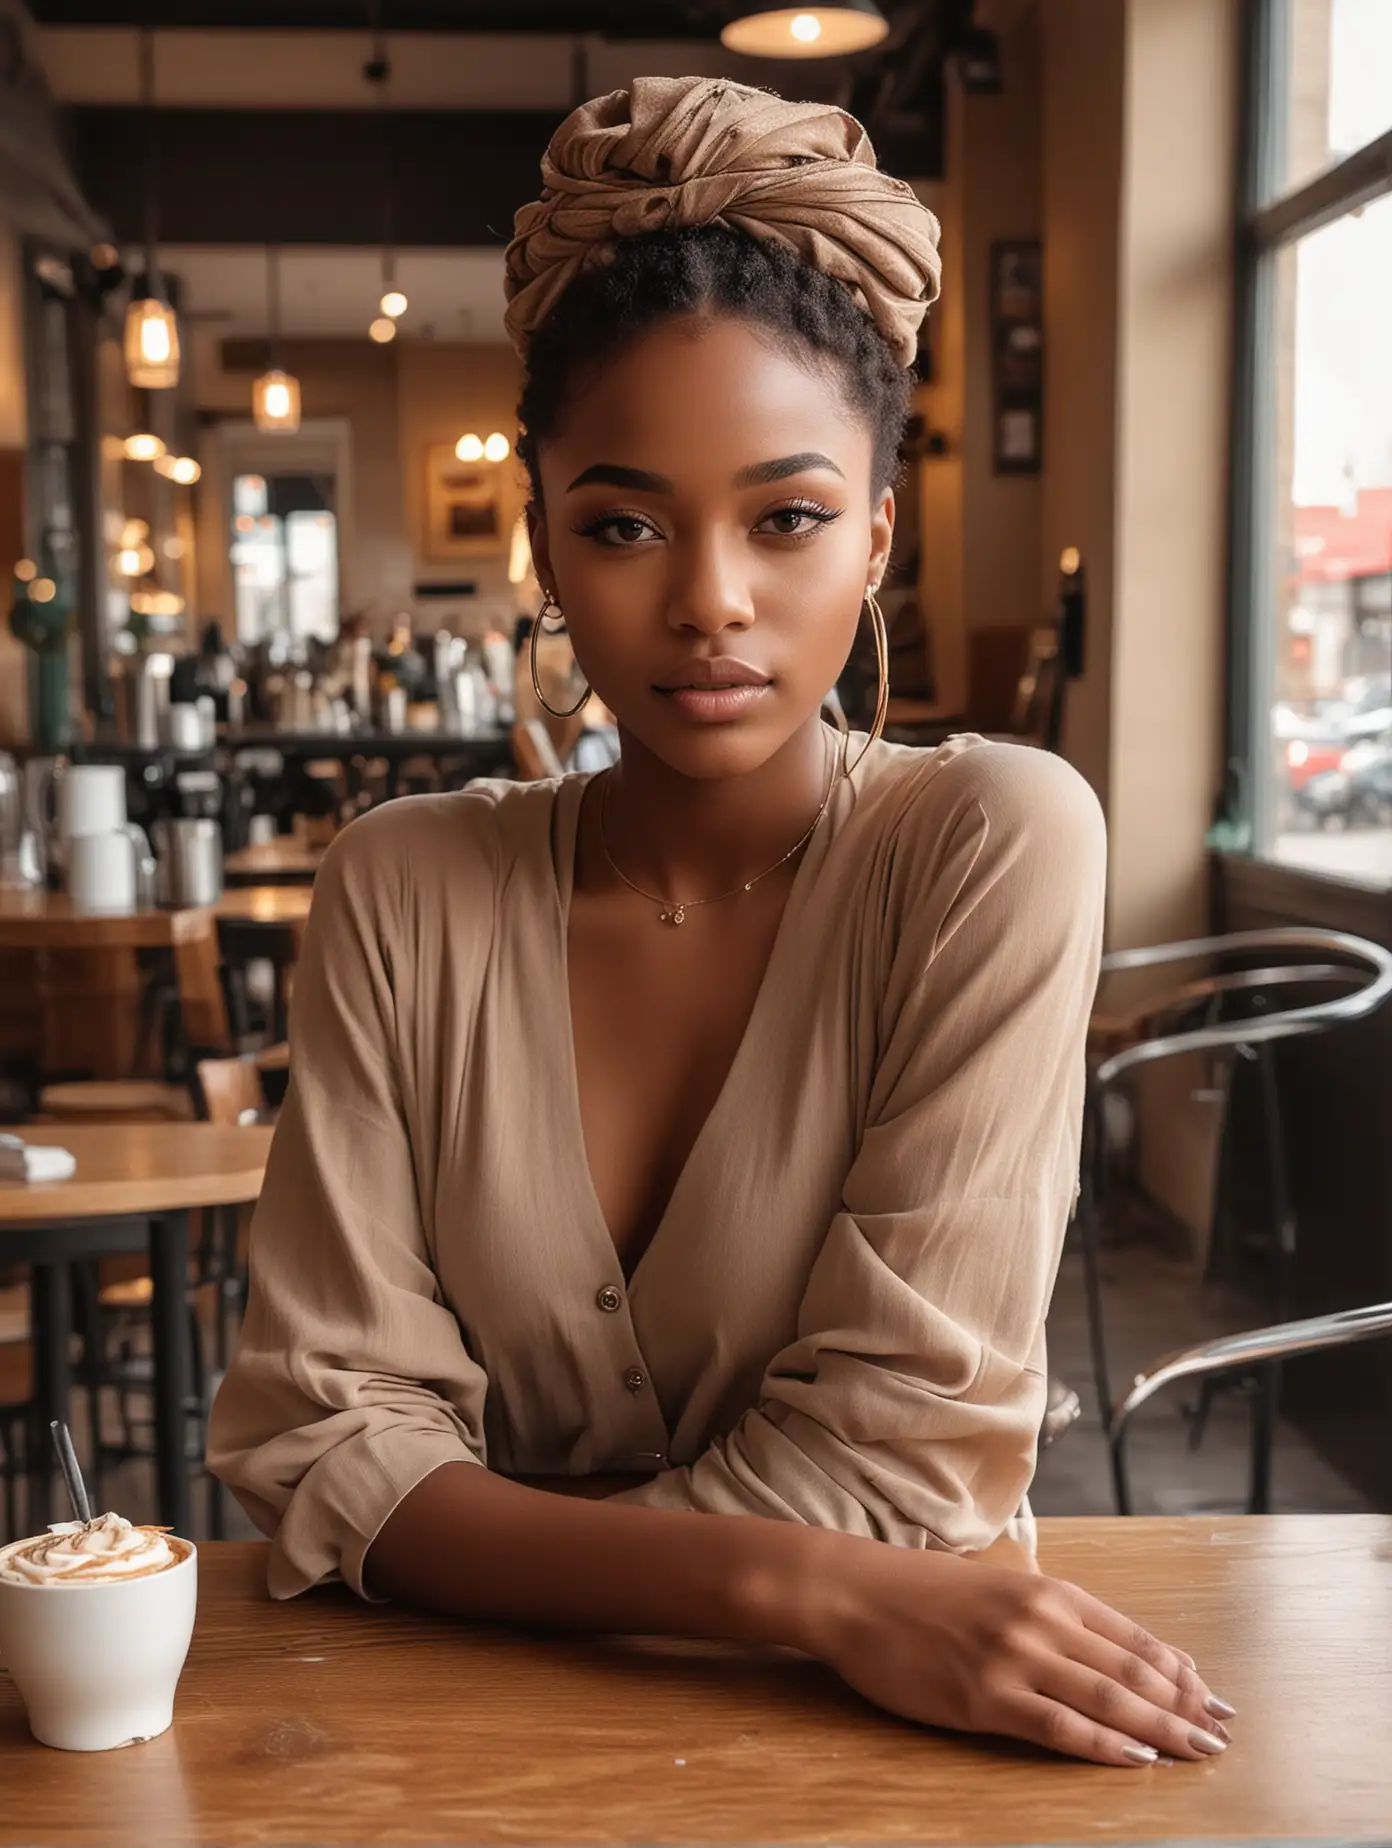 Young AfricanAmerican Woman in Stylish Attire Poses Gracefully in Caf Setting